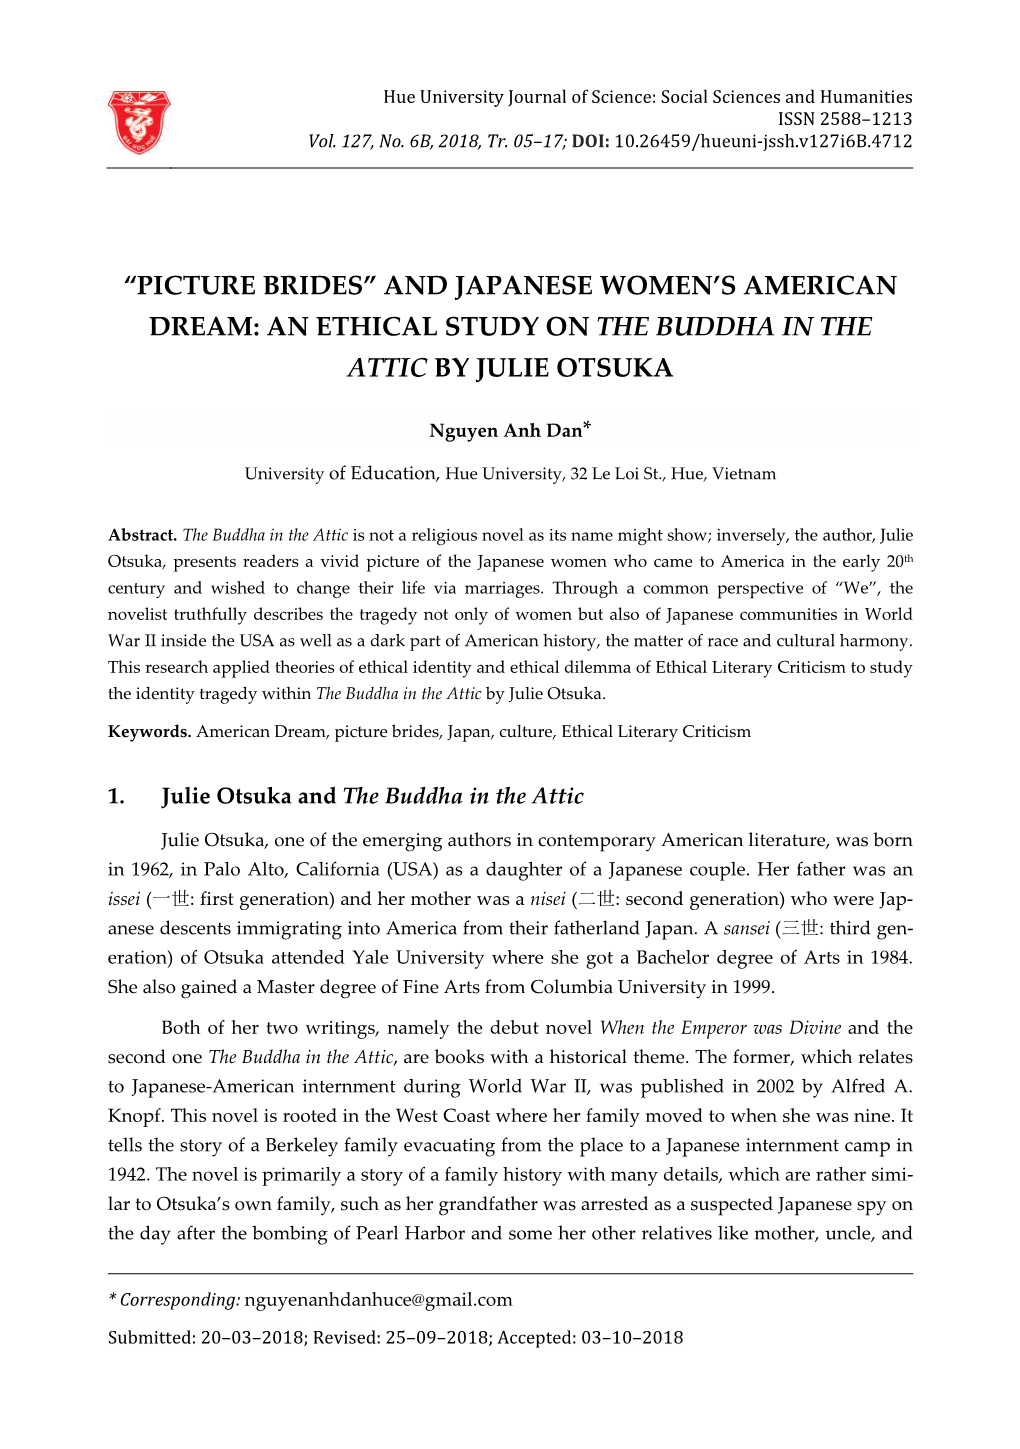 “Picture Brides” and Japanese Women's American Dream